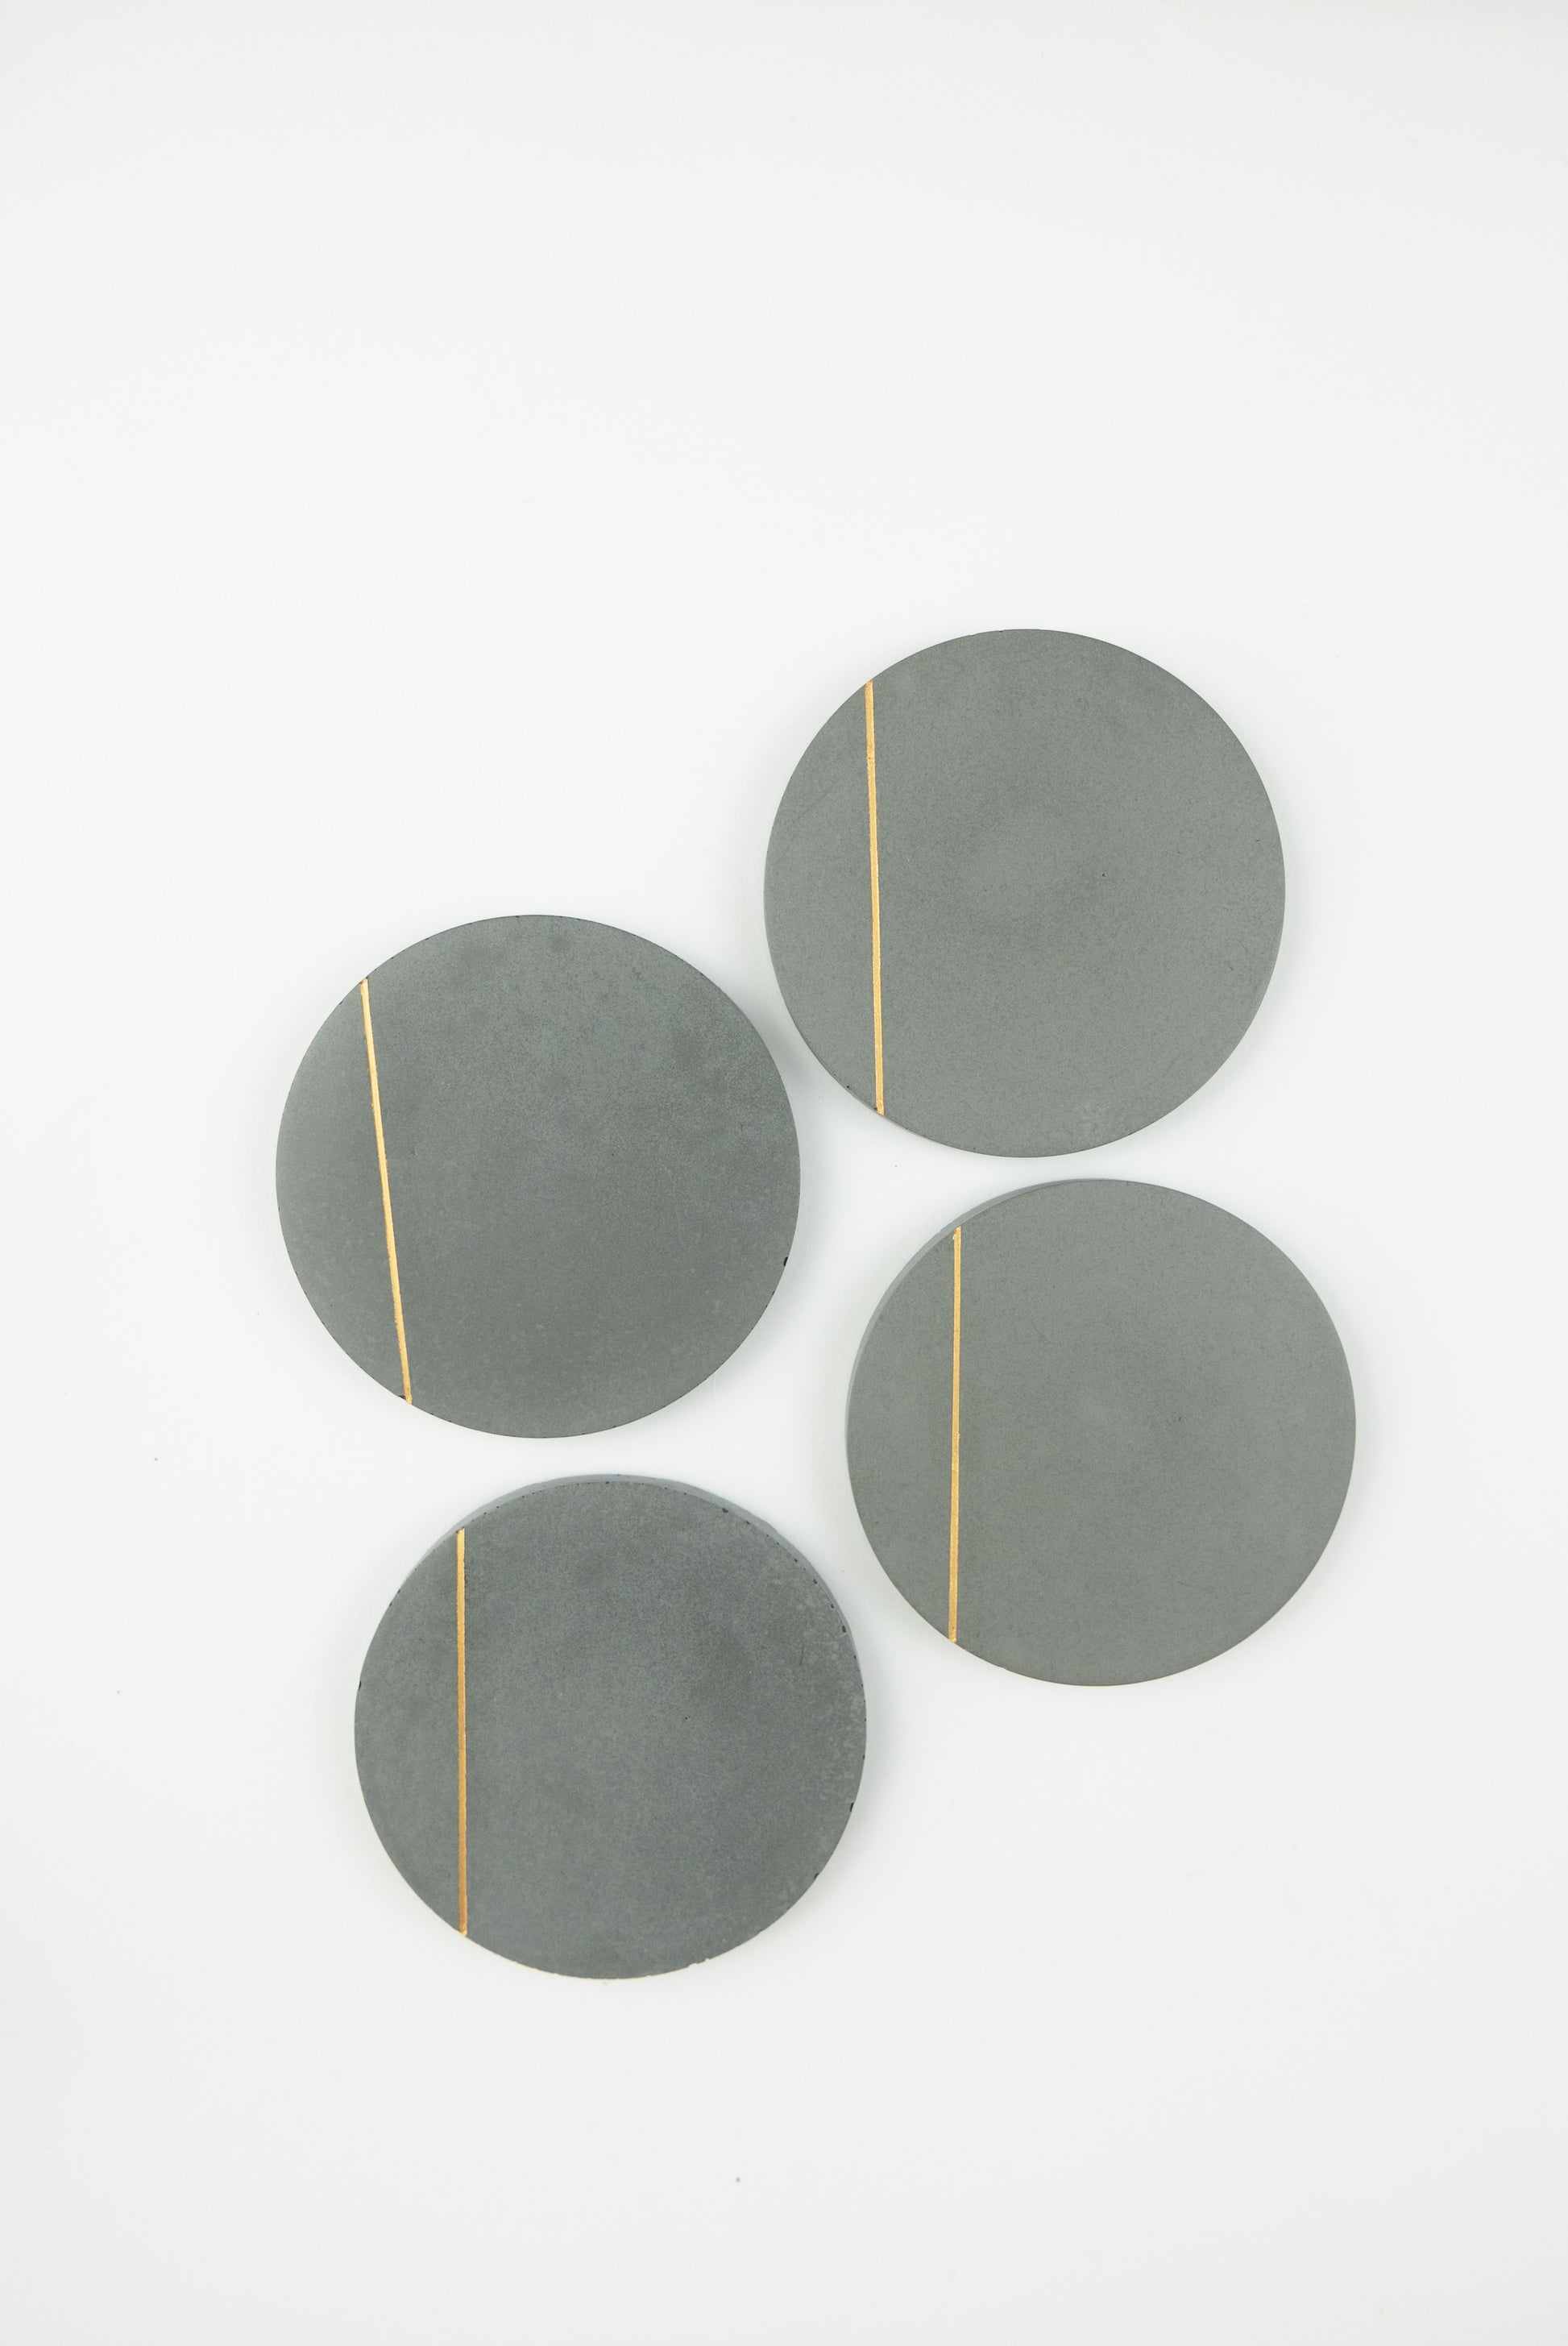 Molded Cement Square Coasters in Blue and Black (Set of 4) - Rustic Fusion